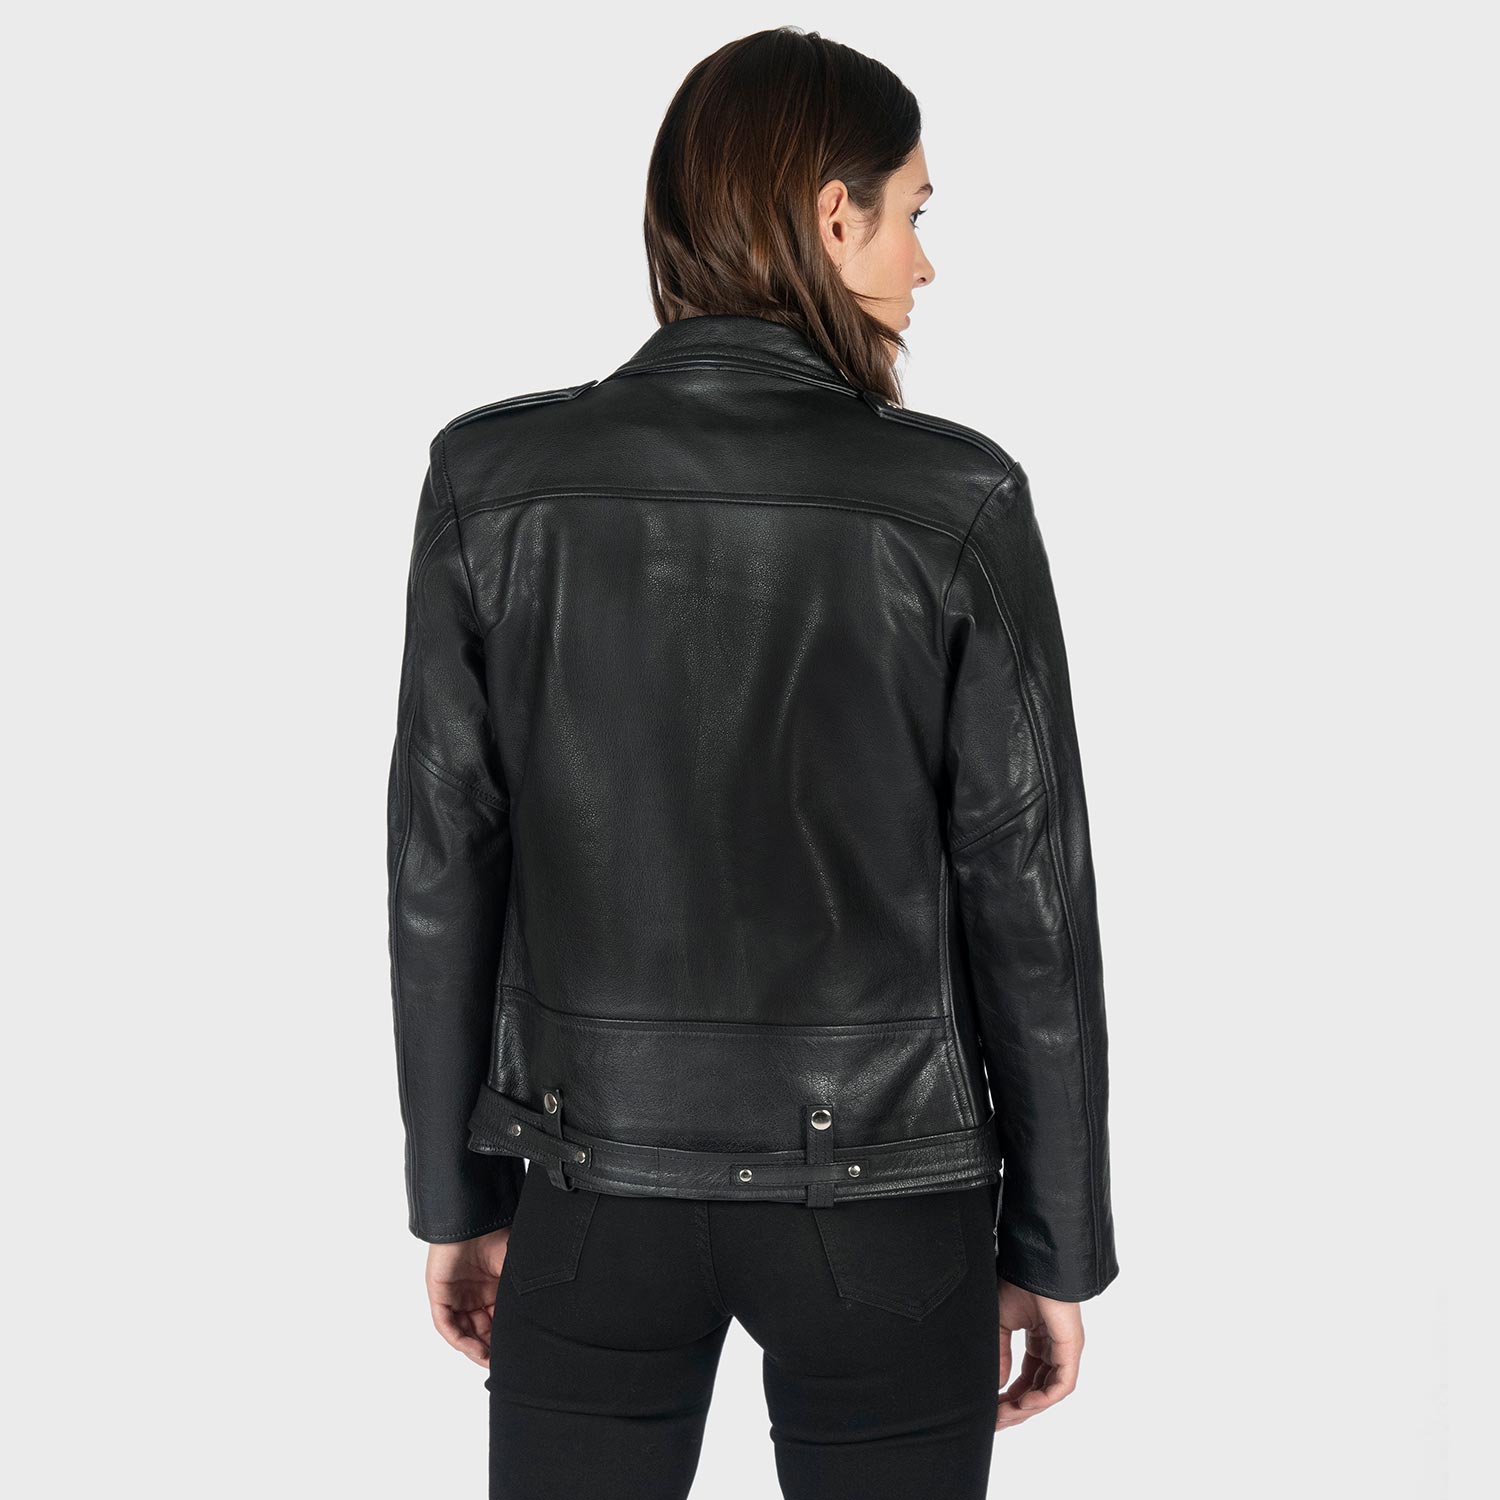 Commando Oversized - Nickel Apparel To Jacket and Black Leather Straight Hell 